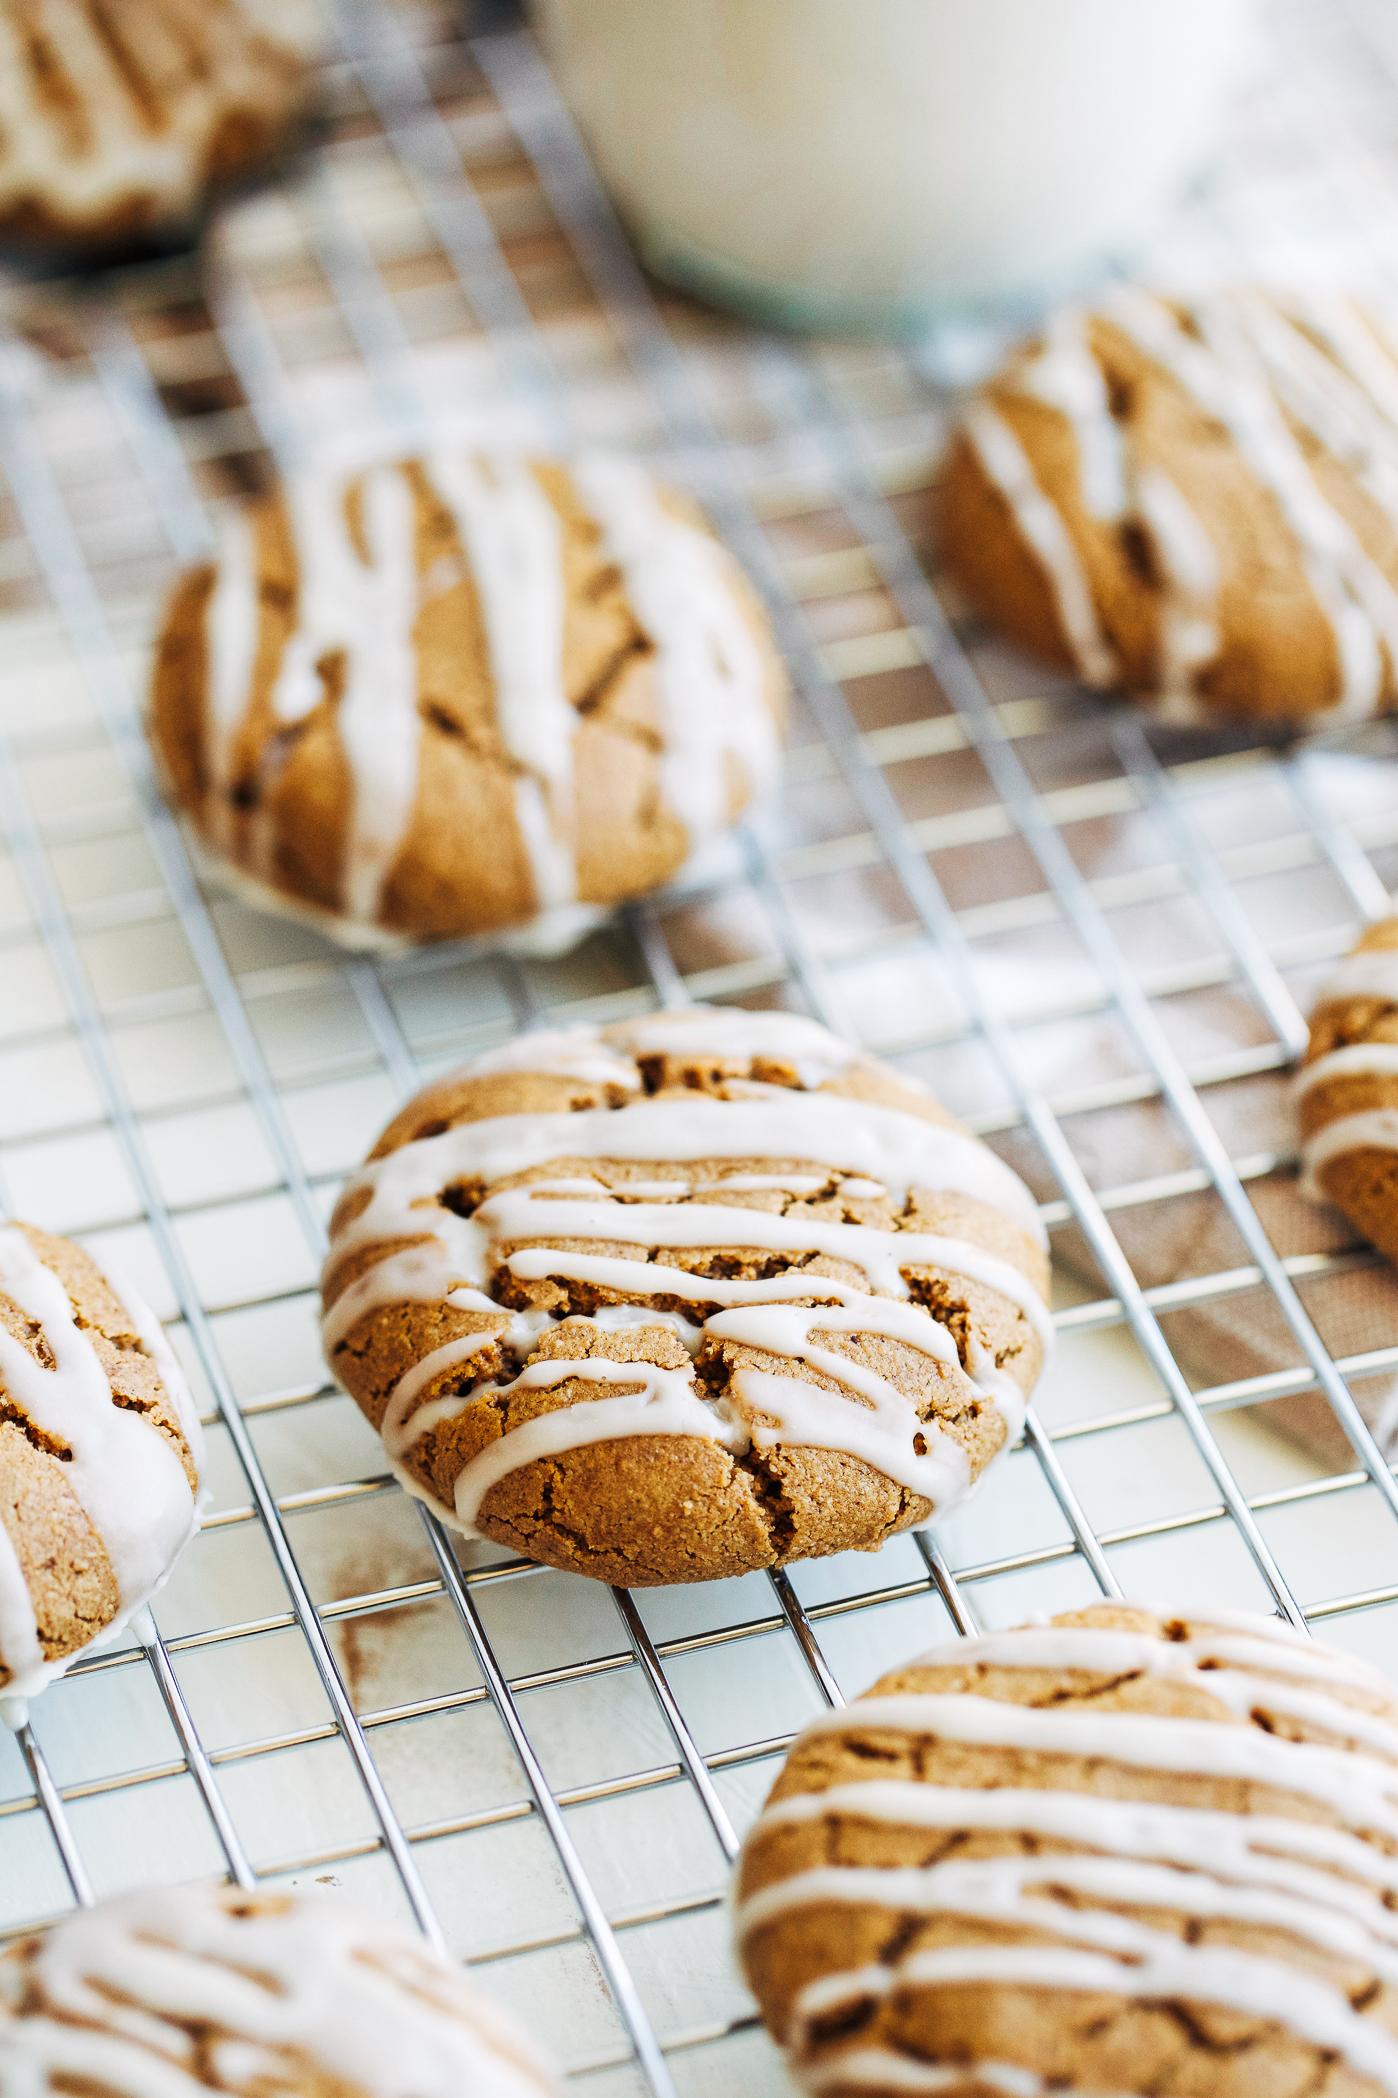  These gluten-free cookies are perfect for sharing with friends and family who have dietary restrictions.